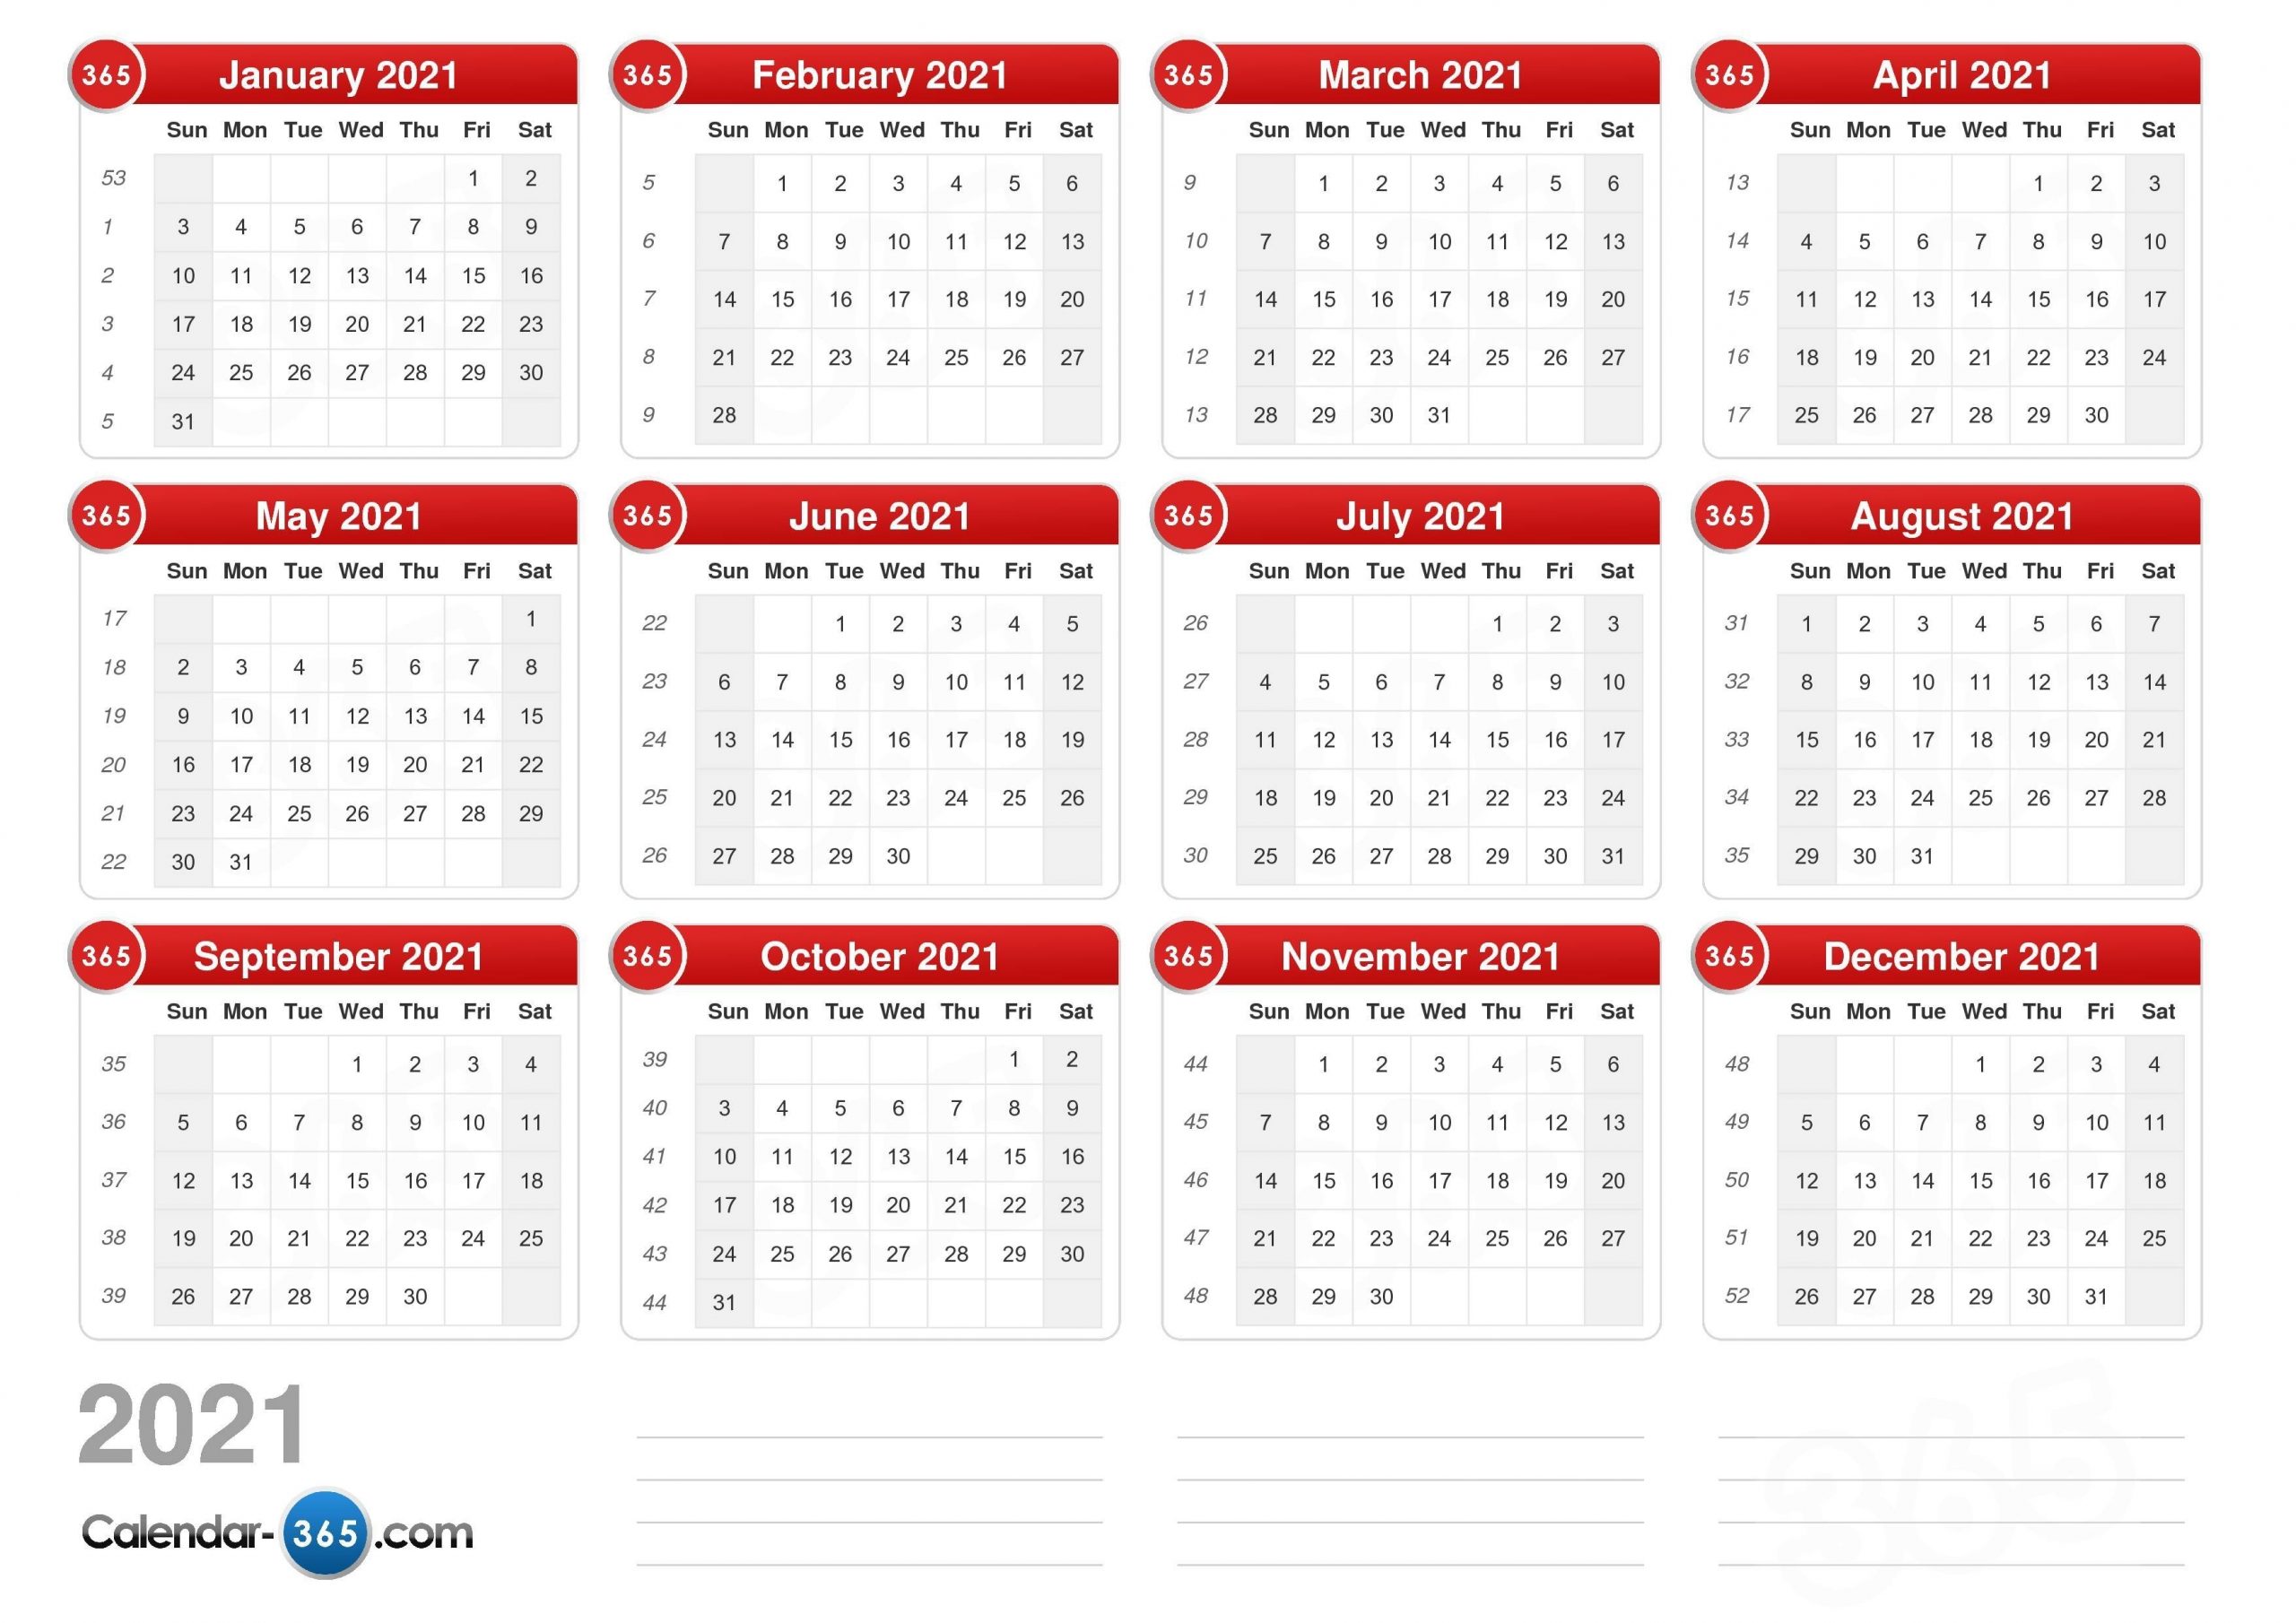 Take Calendar With Days Numbered For 2021